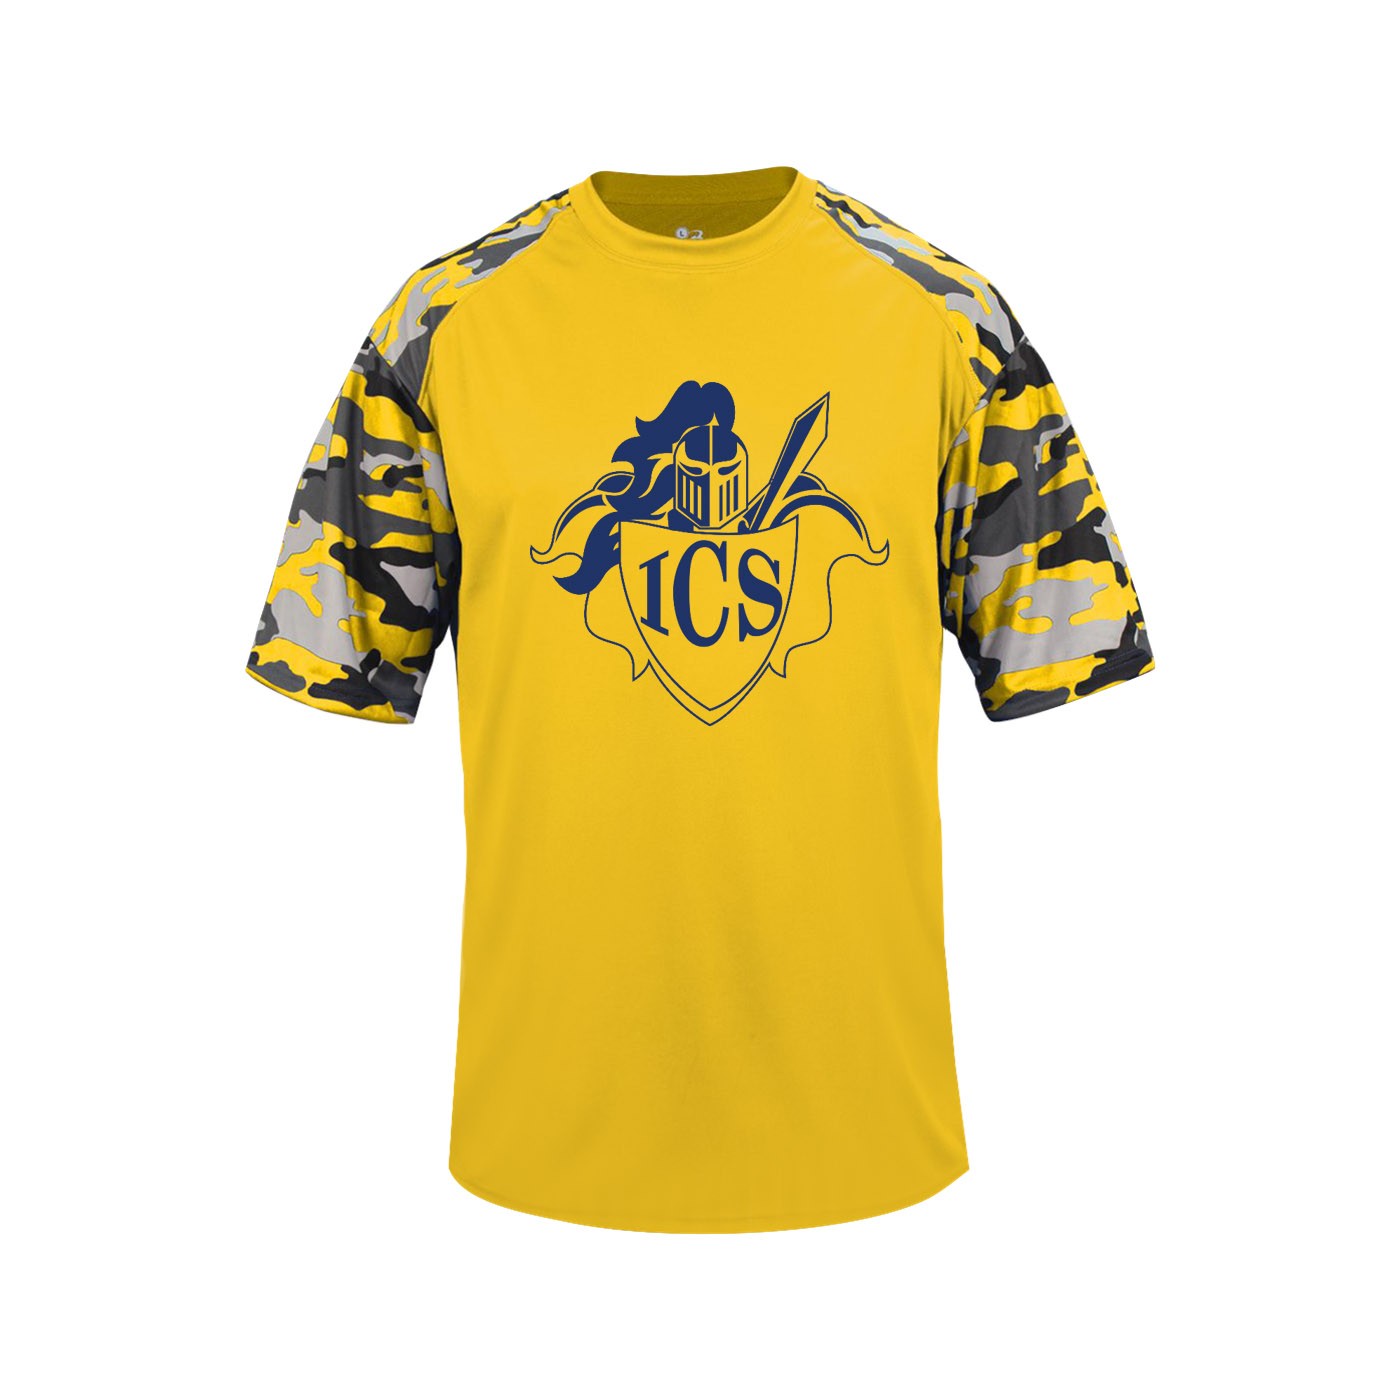 ICS Spirit S/S Camo T-Shirt w/ Navy Logo #13 - Please Allow 3-4 Weeks for Delivery